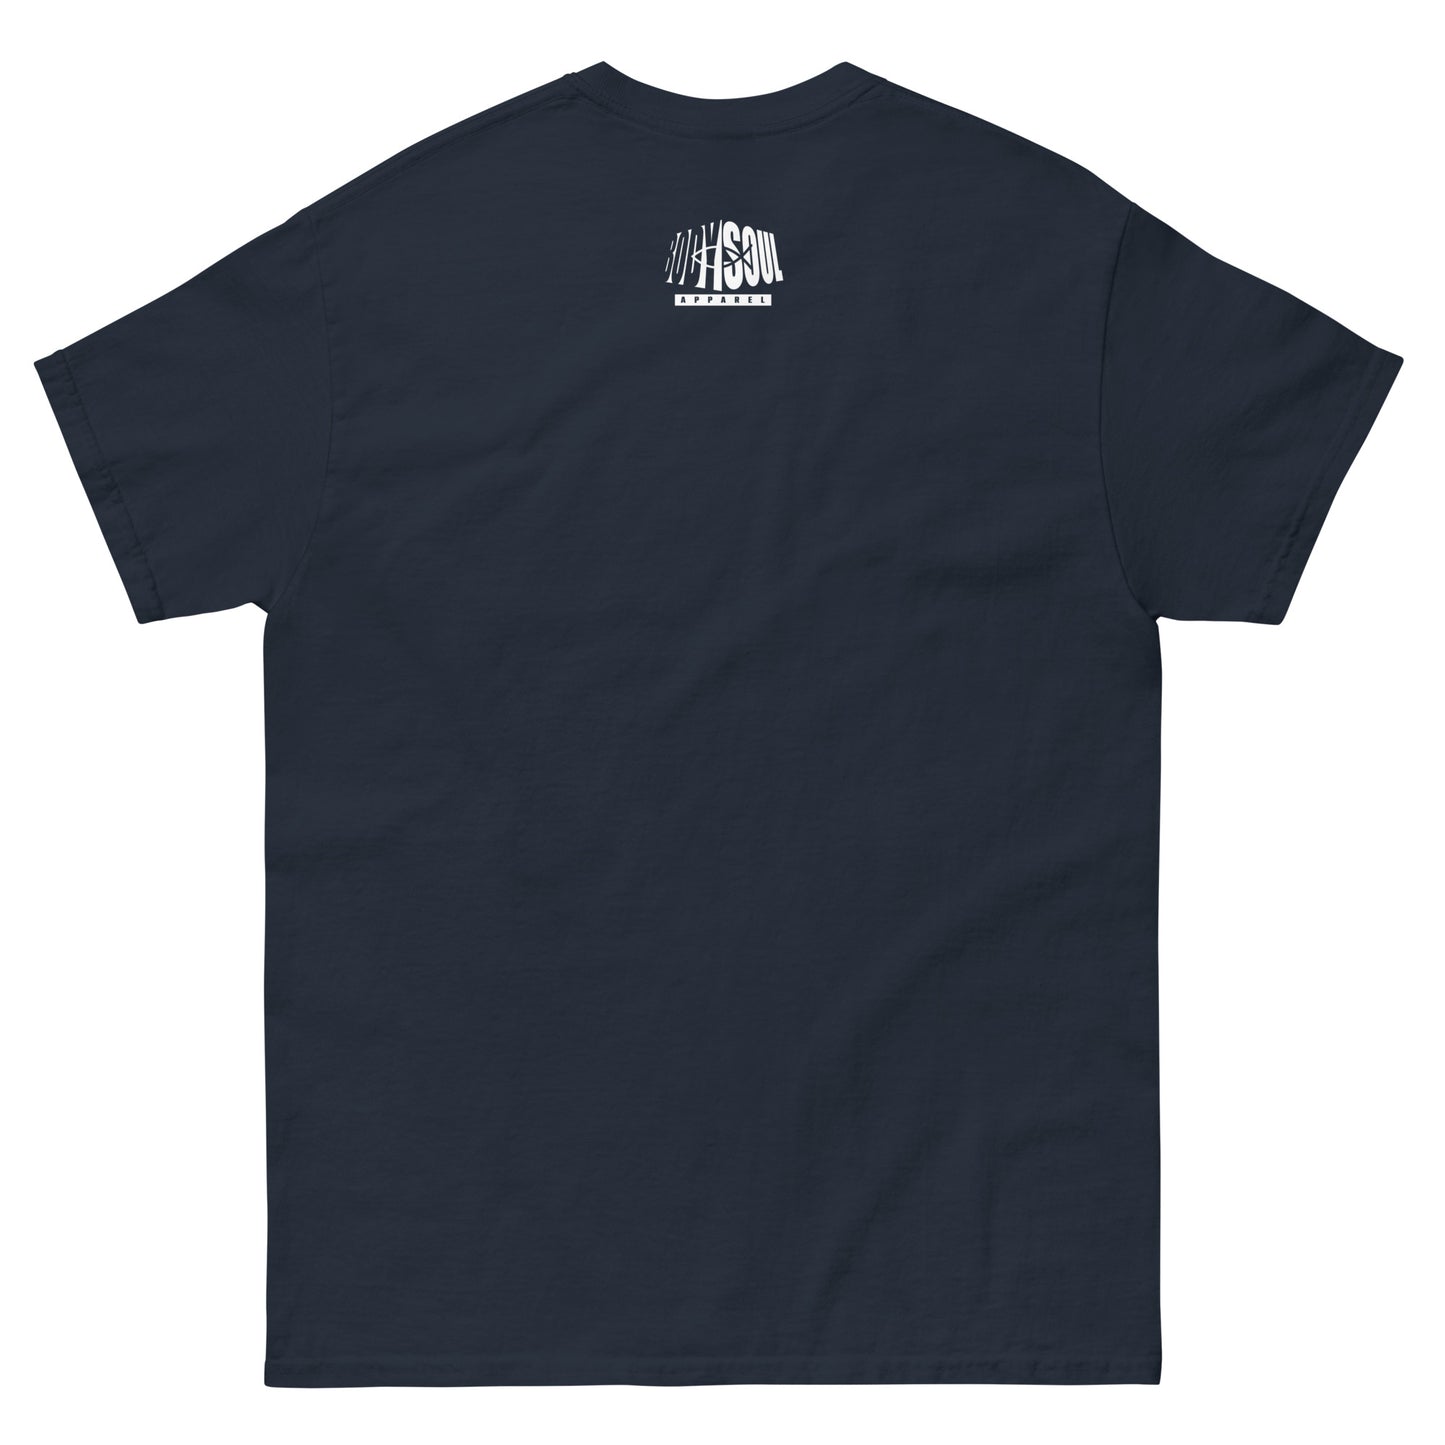 GIVES ME STRENGTH- Men's classic tee